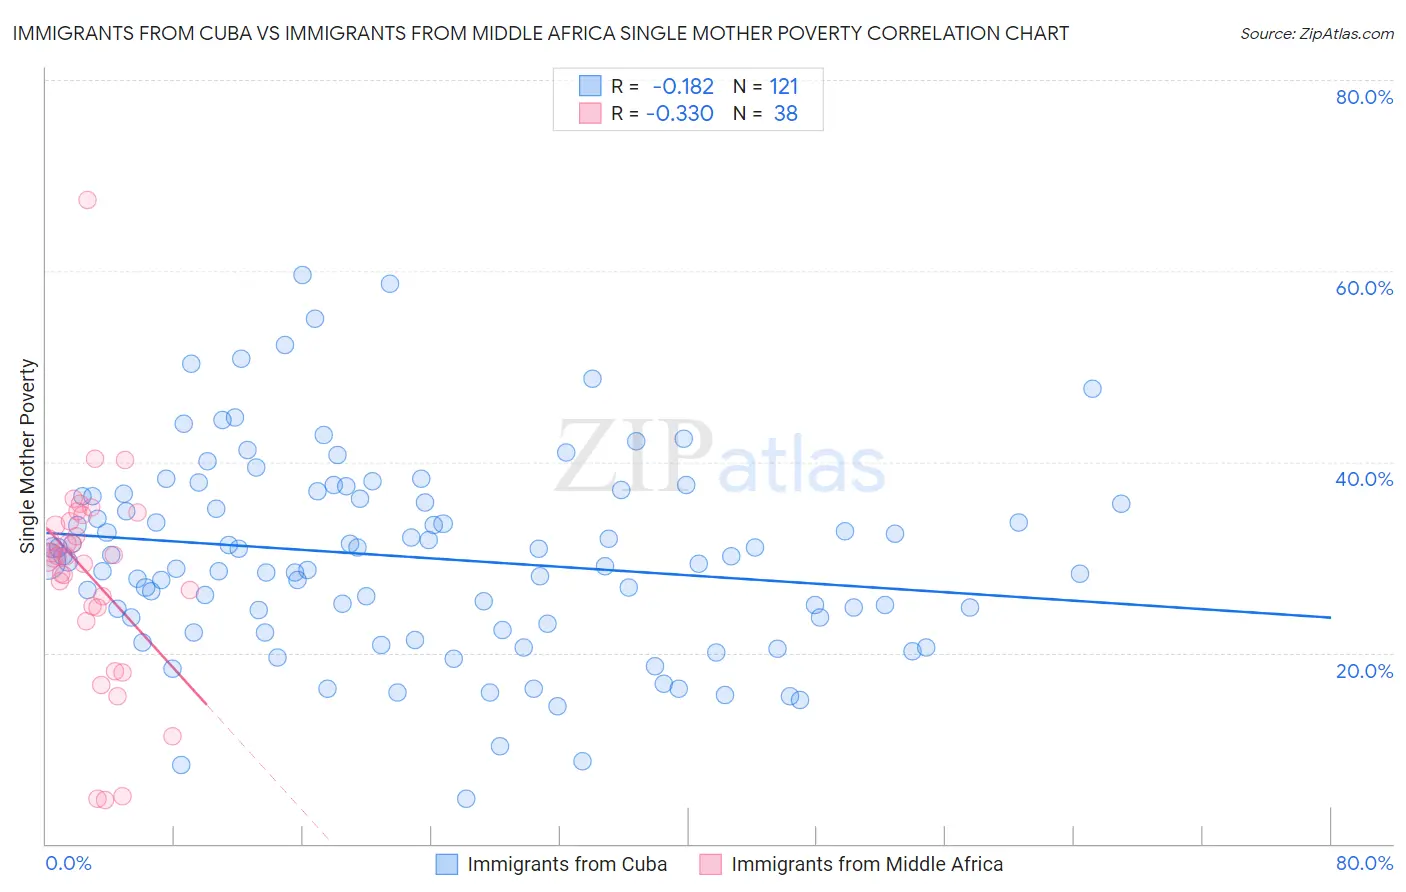 Immigrants from Cuba vs Immigrants from Middle Africa Single Mother Poverty